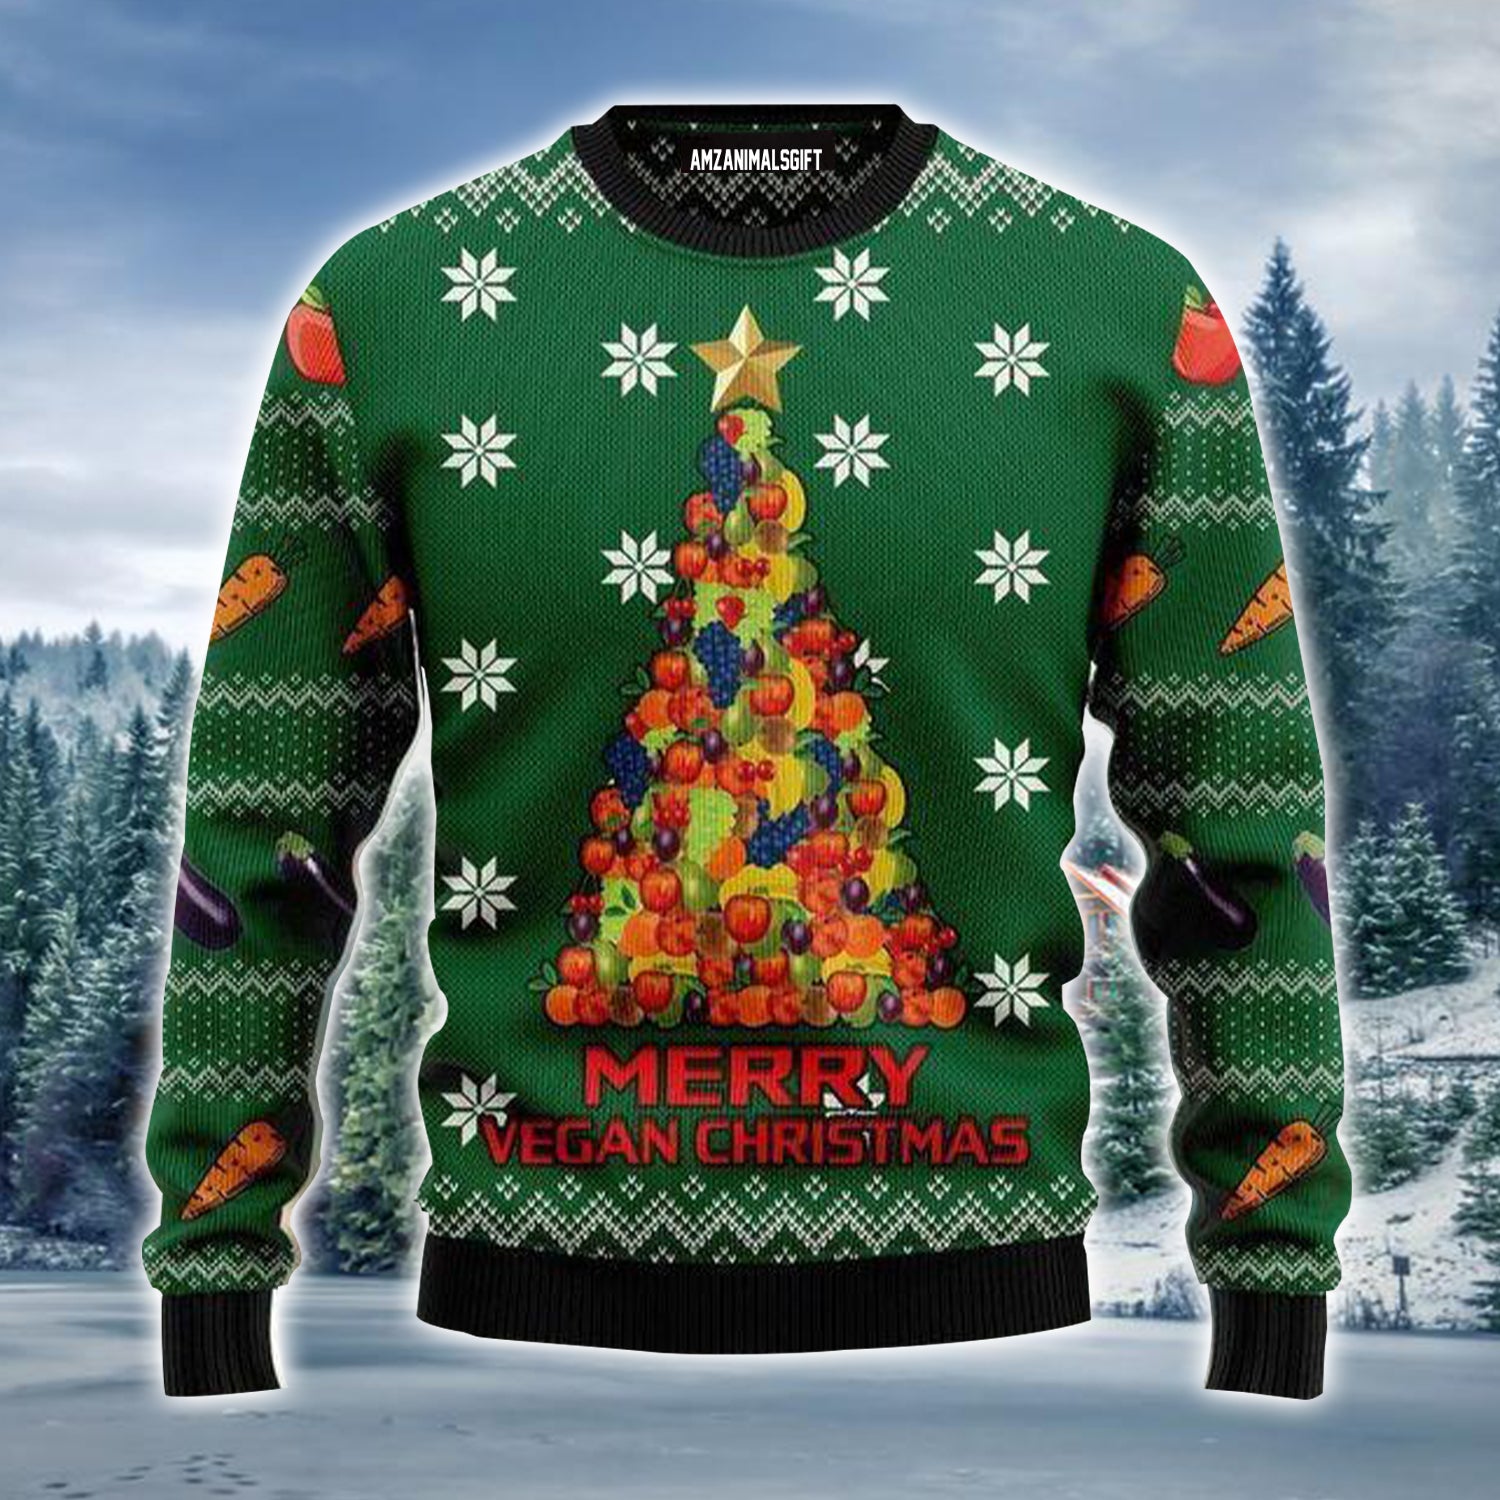 Christmas Tree Ugly Christmas Sweater, Merry Vegan Christmas Ugly Sweater For Men & Women - Perfect Gift For Christmas, Family, Friends